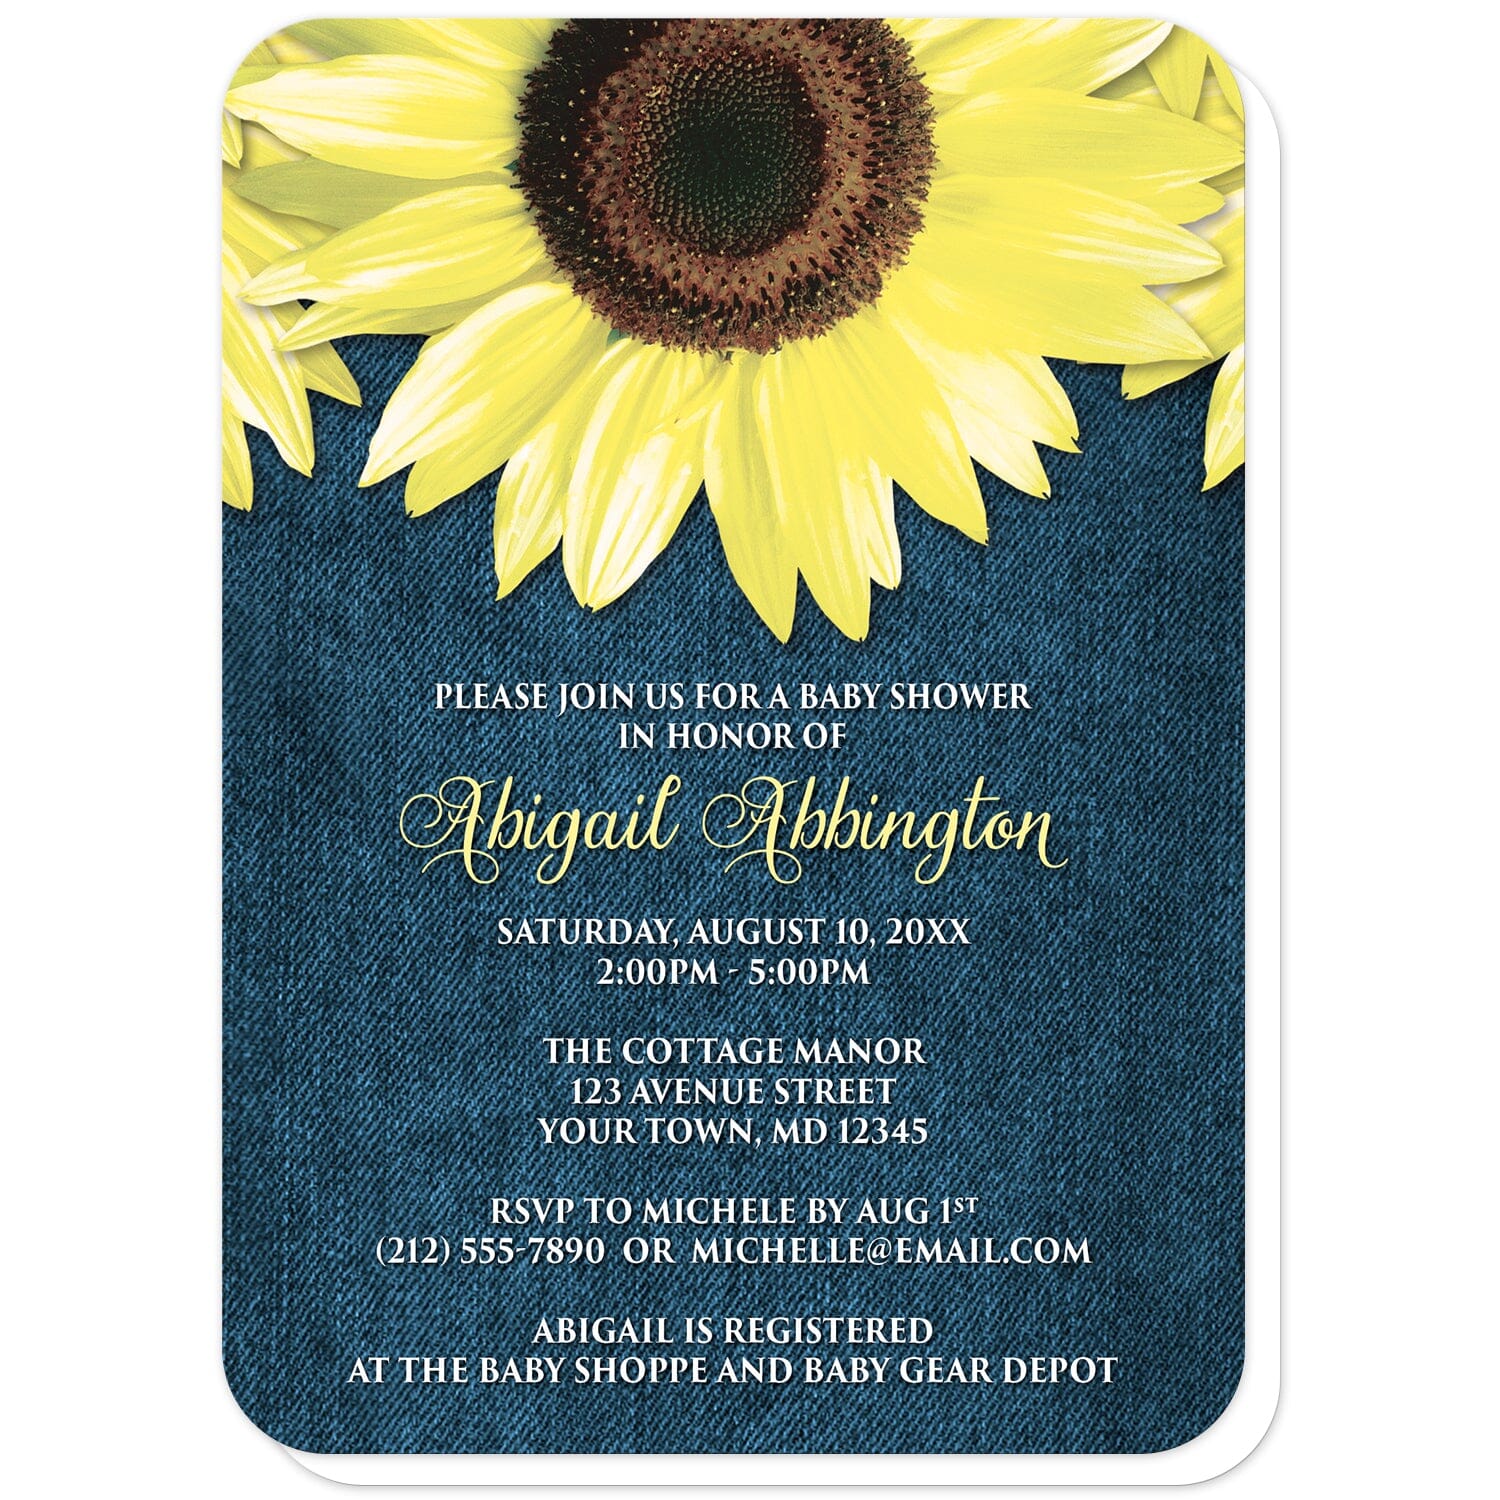 Rustic Sunflower and Denim Baby Shower Invitations (with rounded corners) at Artistically Invited. Southern-inspired rustic sunflower and denim baby shower invitations designed with large yellow sunflowers along the top over a country blue denim design. Your personalized baby shower celebration details are custom printed in yellow and white over the blue denim background below the pretty sunflowers. 